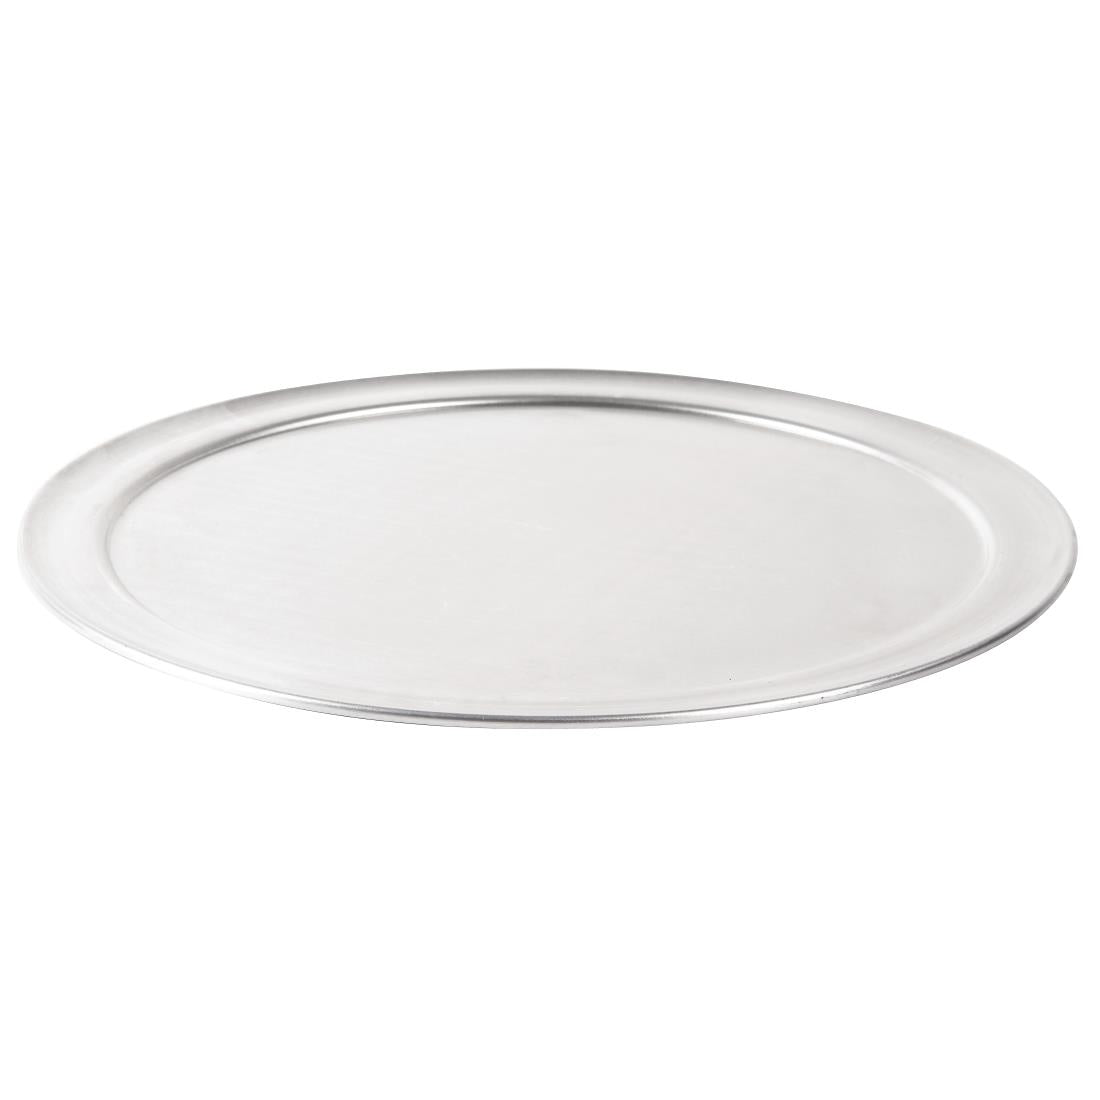 (Available TBC) F008 Vogue Aluminium Pizza Tray 12in JD Catering Equipment Solutions Ltd